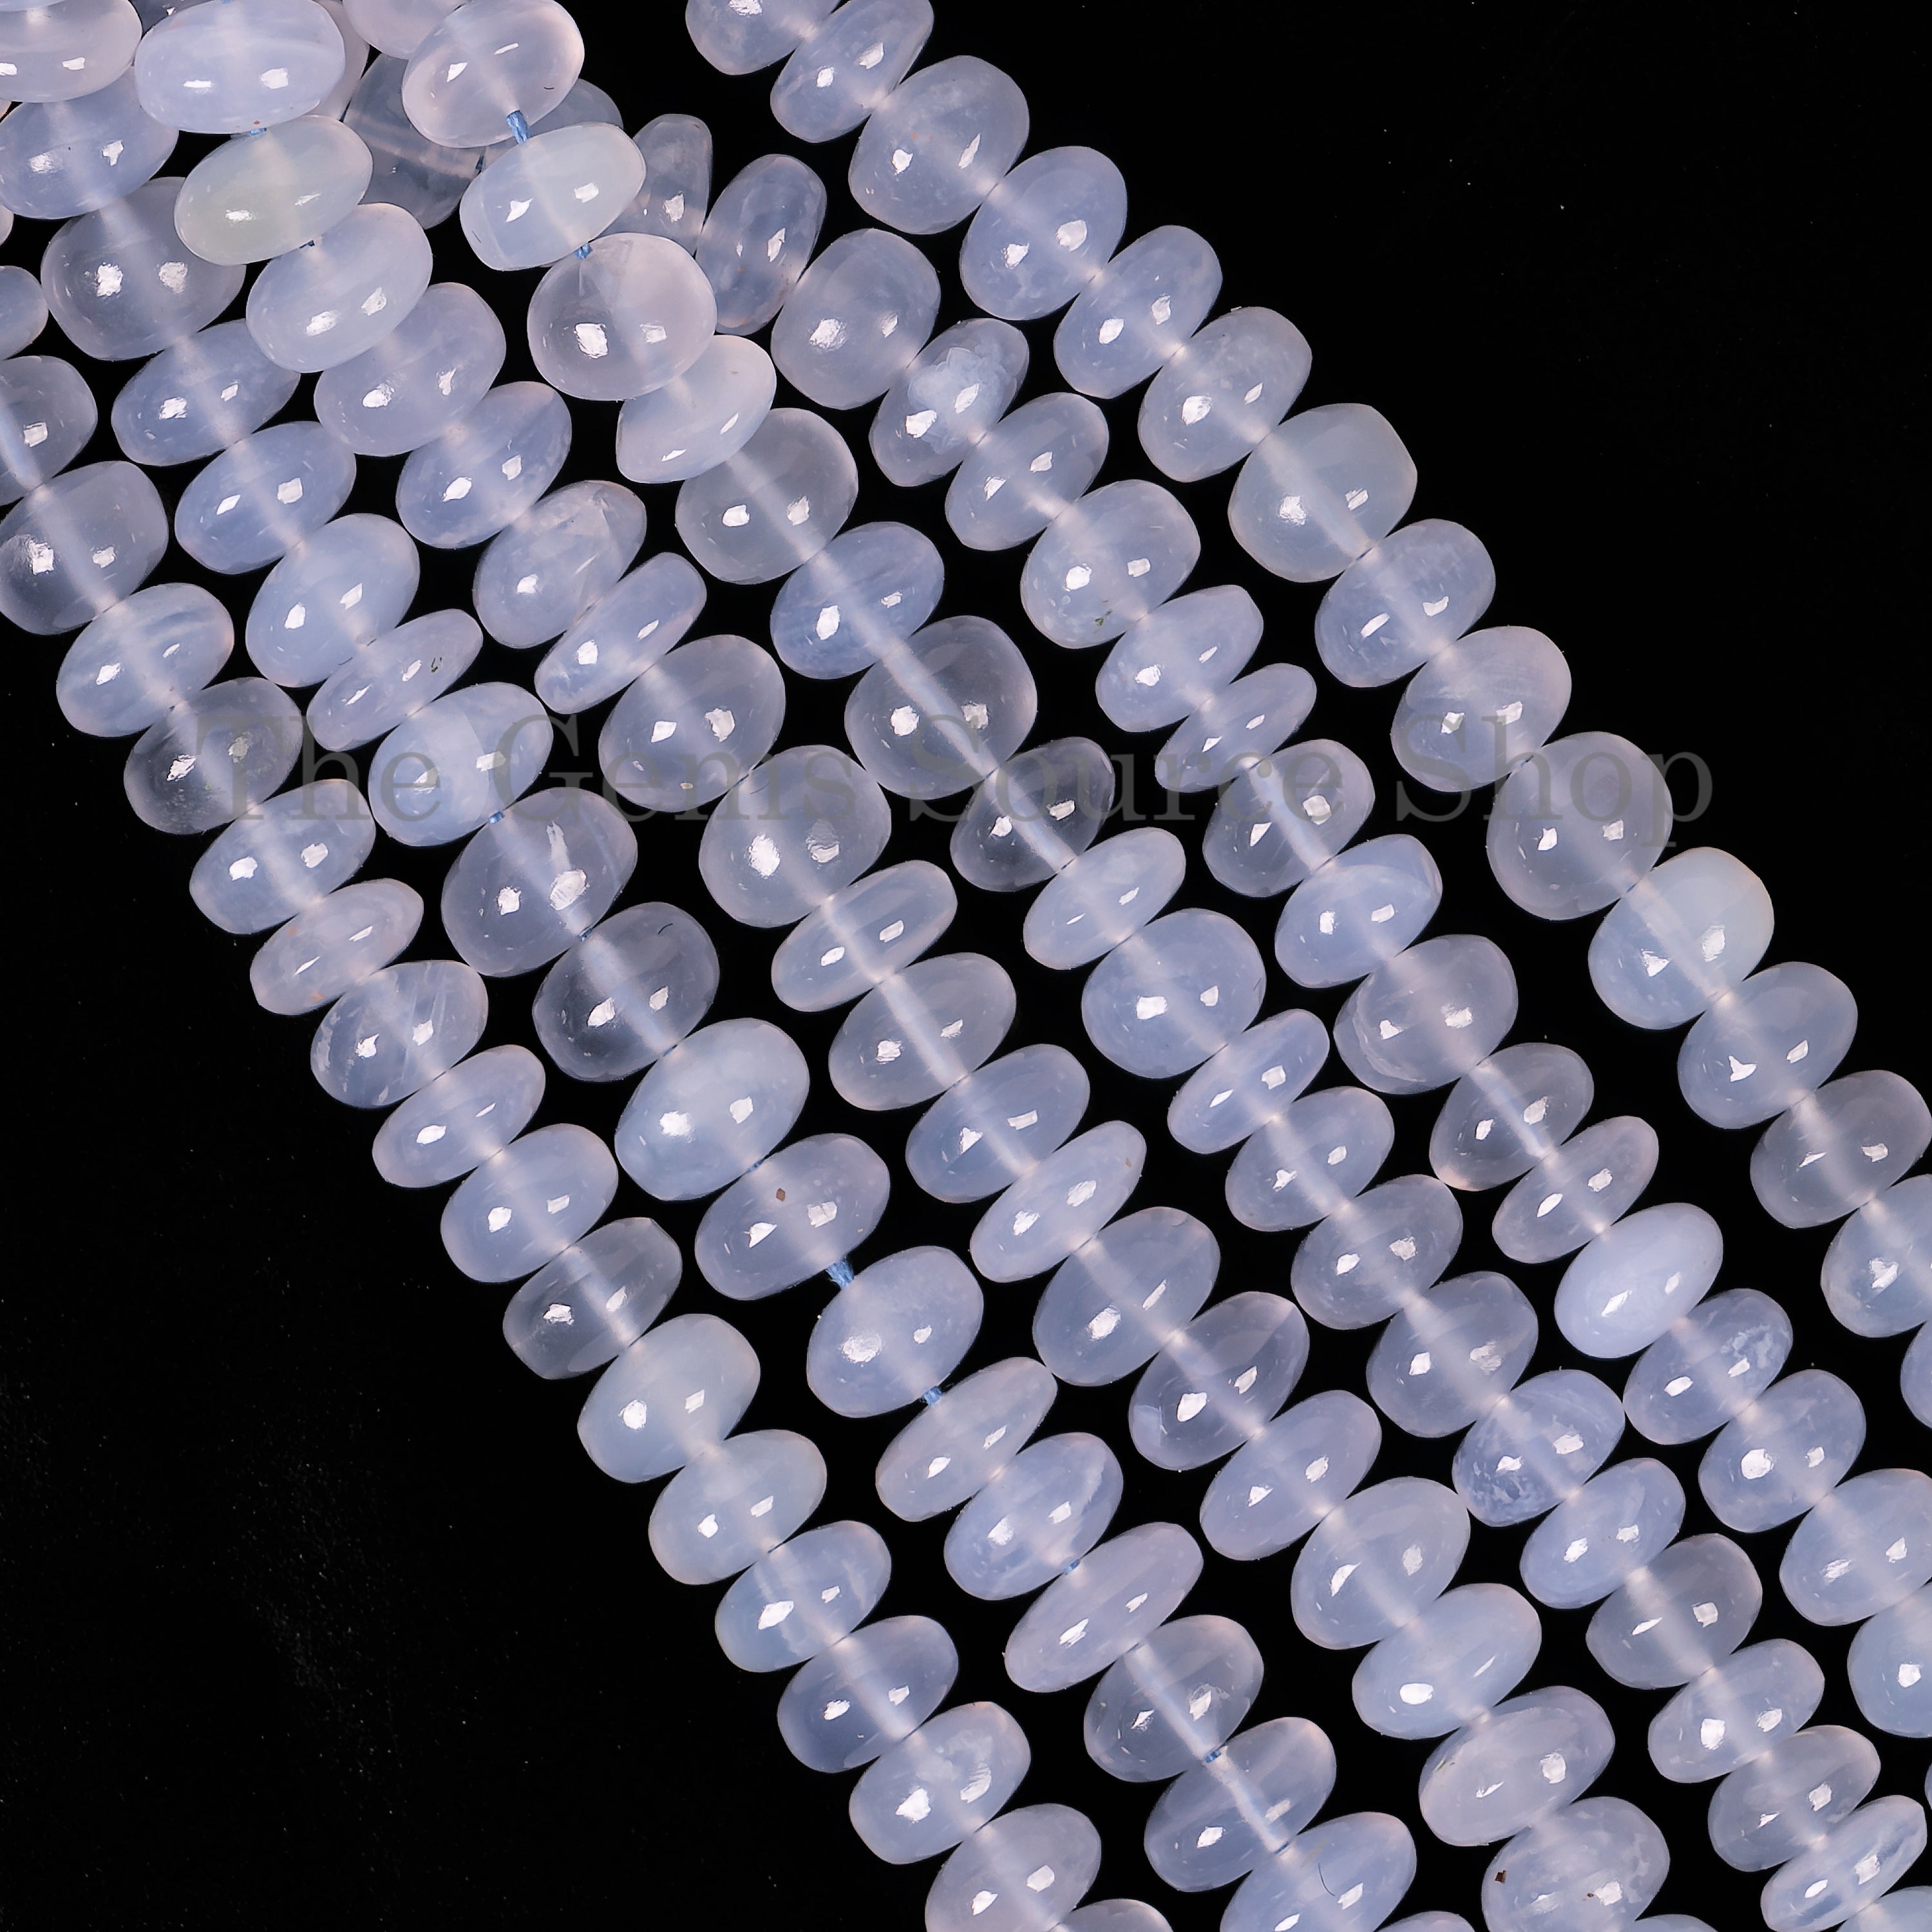 5.75-6 mm Blue Chalcedony Smooth Rondelle Beads TGS-4532